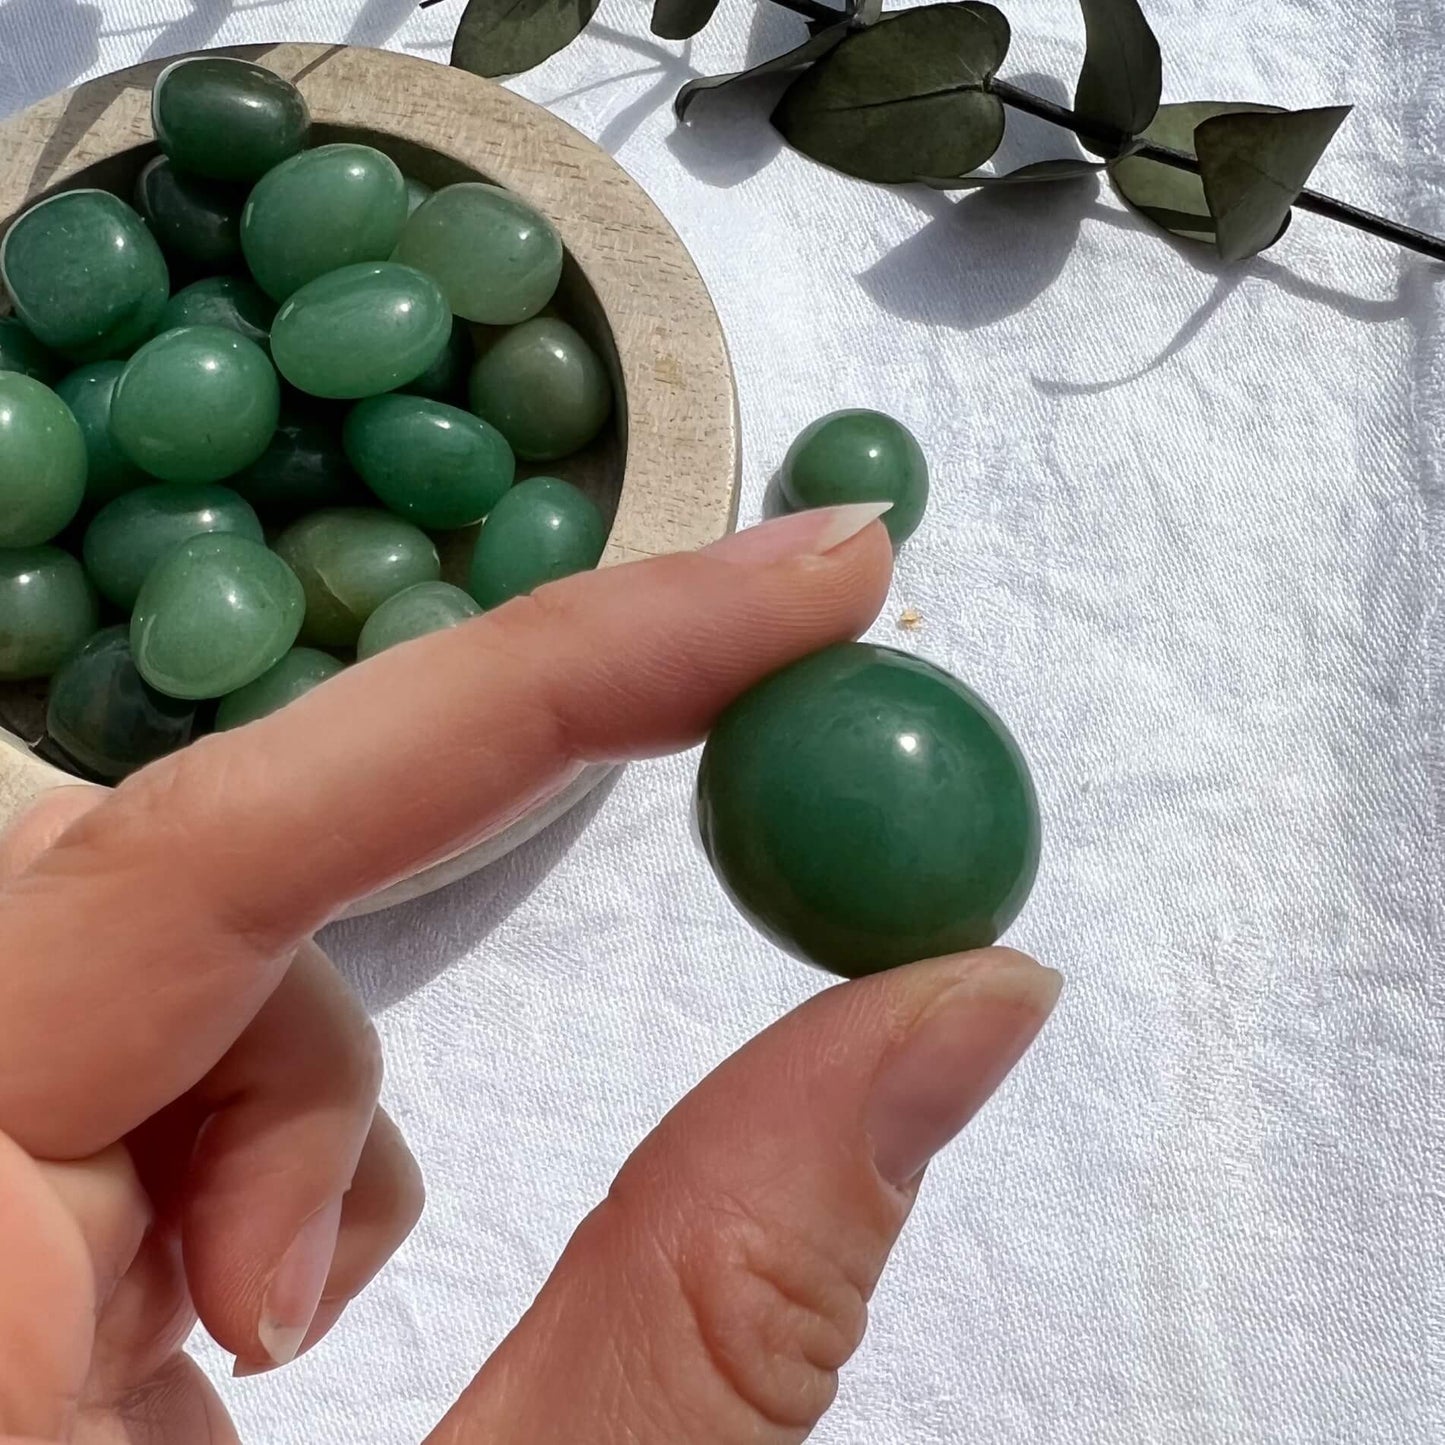 A perfect green glossy Green Aventurine crystal tumble stone held to camera